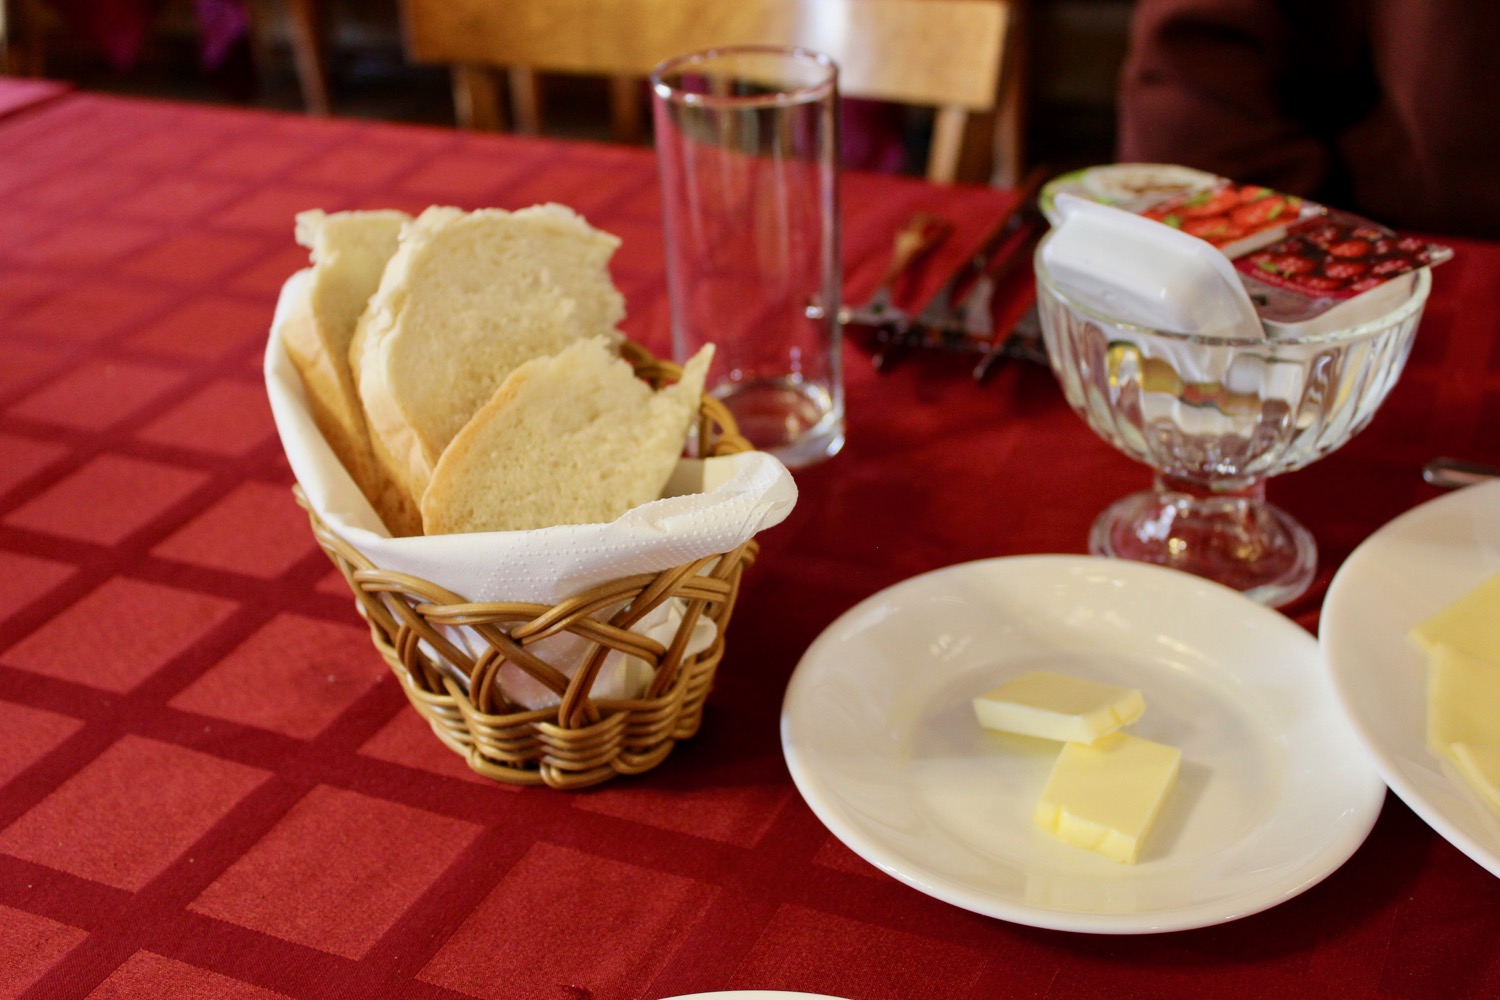 a basket of bread and butter on a plate